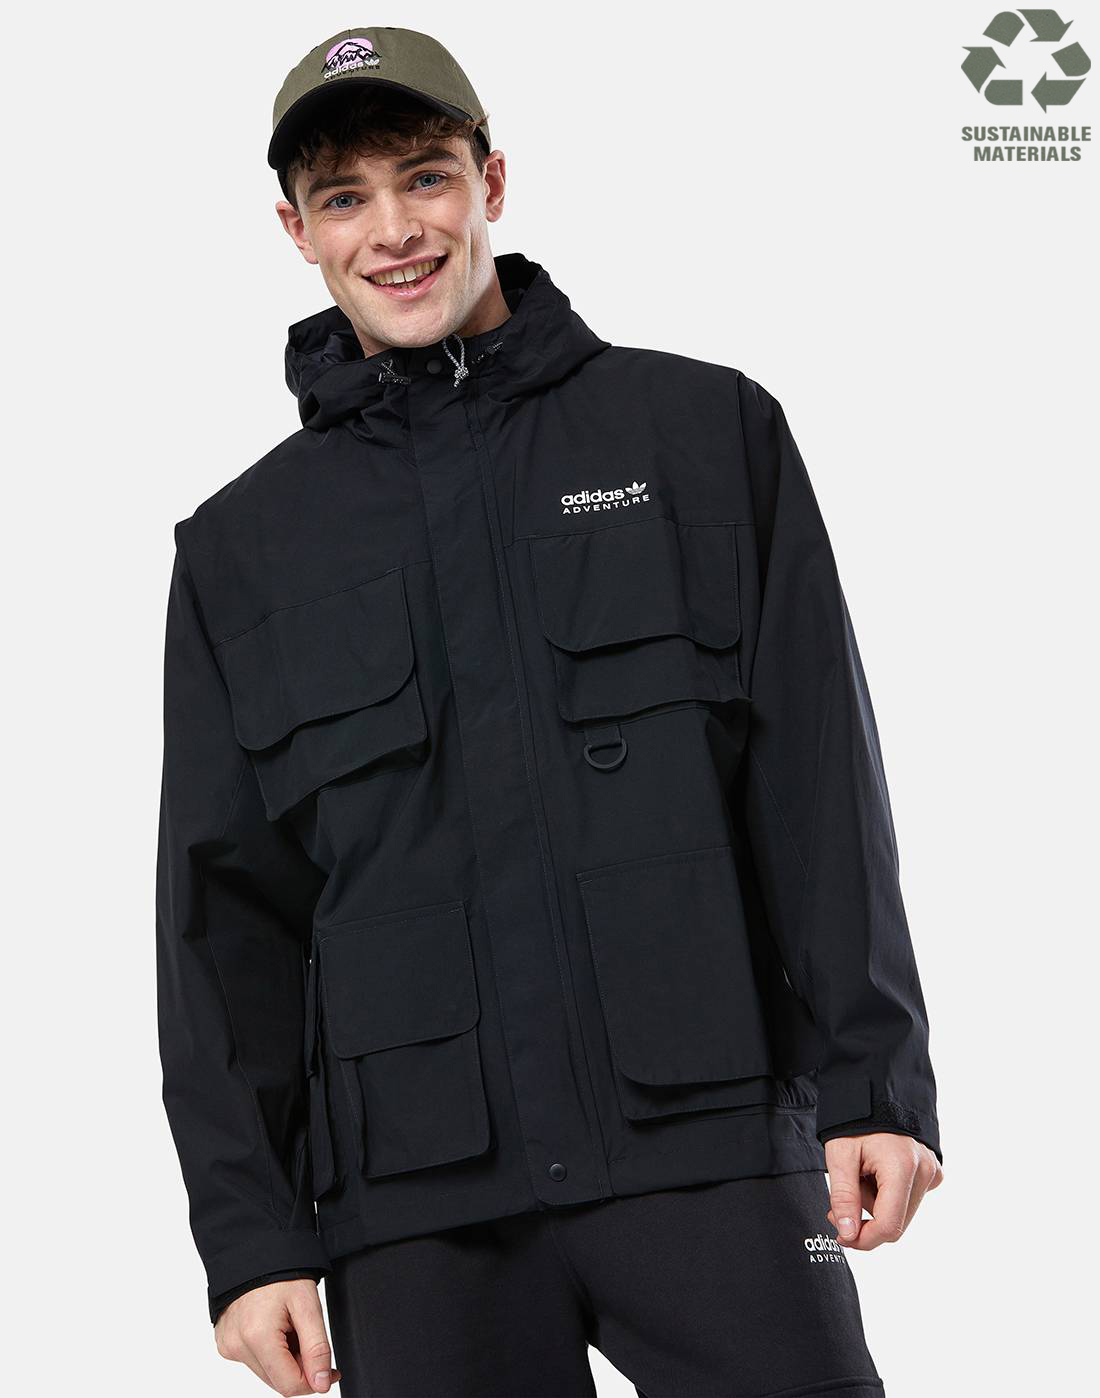 Bugatti Multi Pocket Utility Jacket Mens Large for sale in Co. Dublin for  €39 on DoneDeal